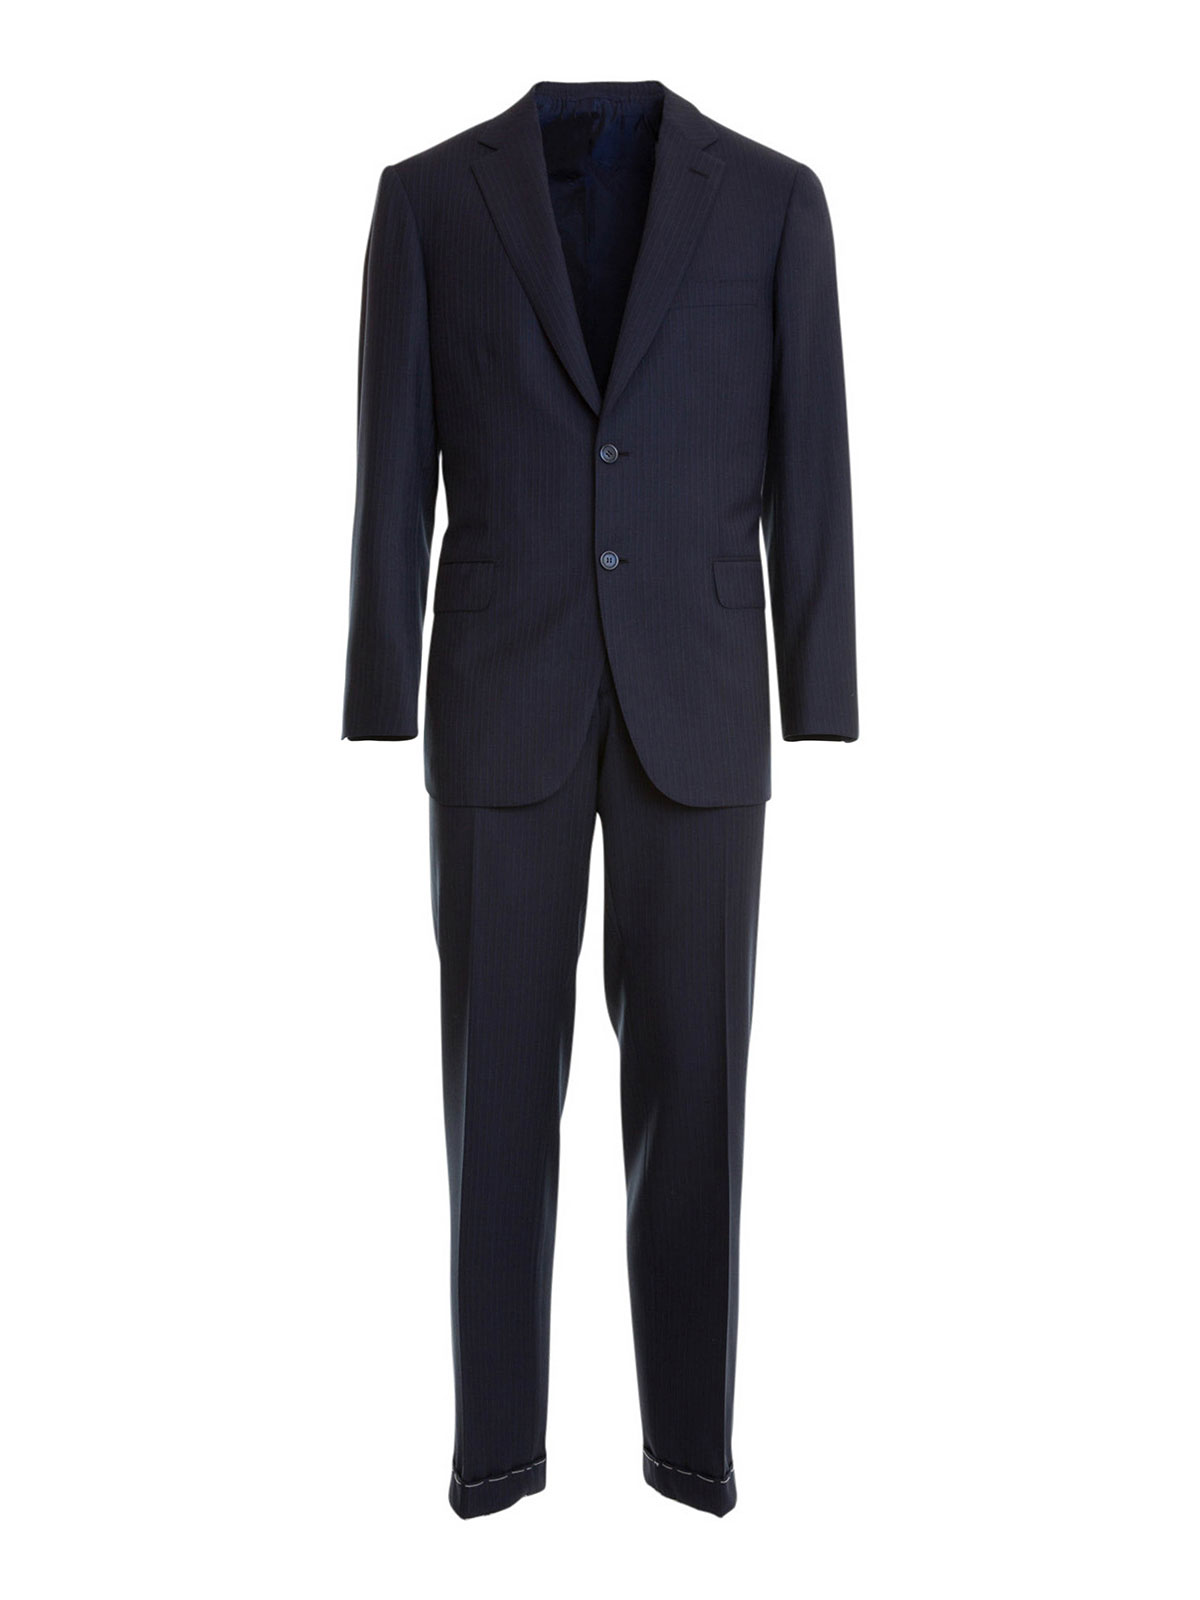 Formal suits Brioni - Brunico wool formal suit - RA000MO5ADL | iKRIX.com